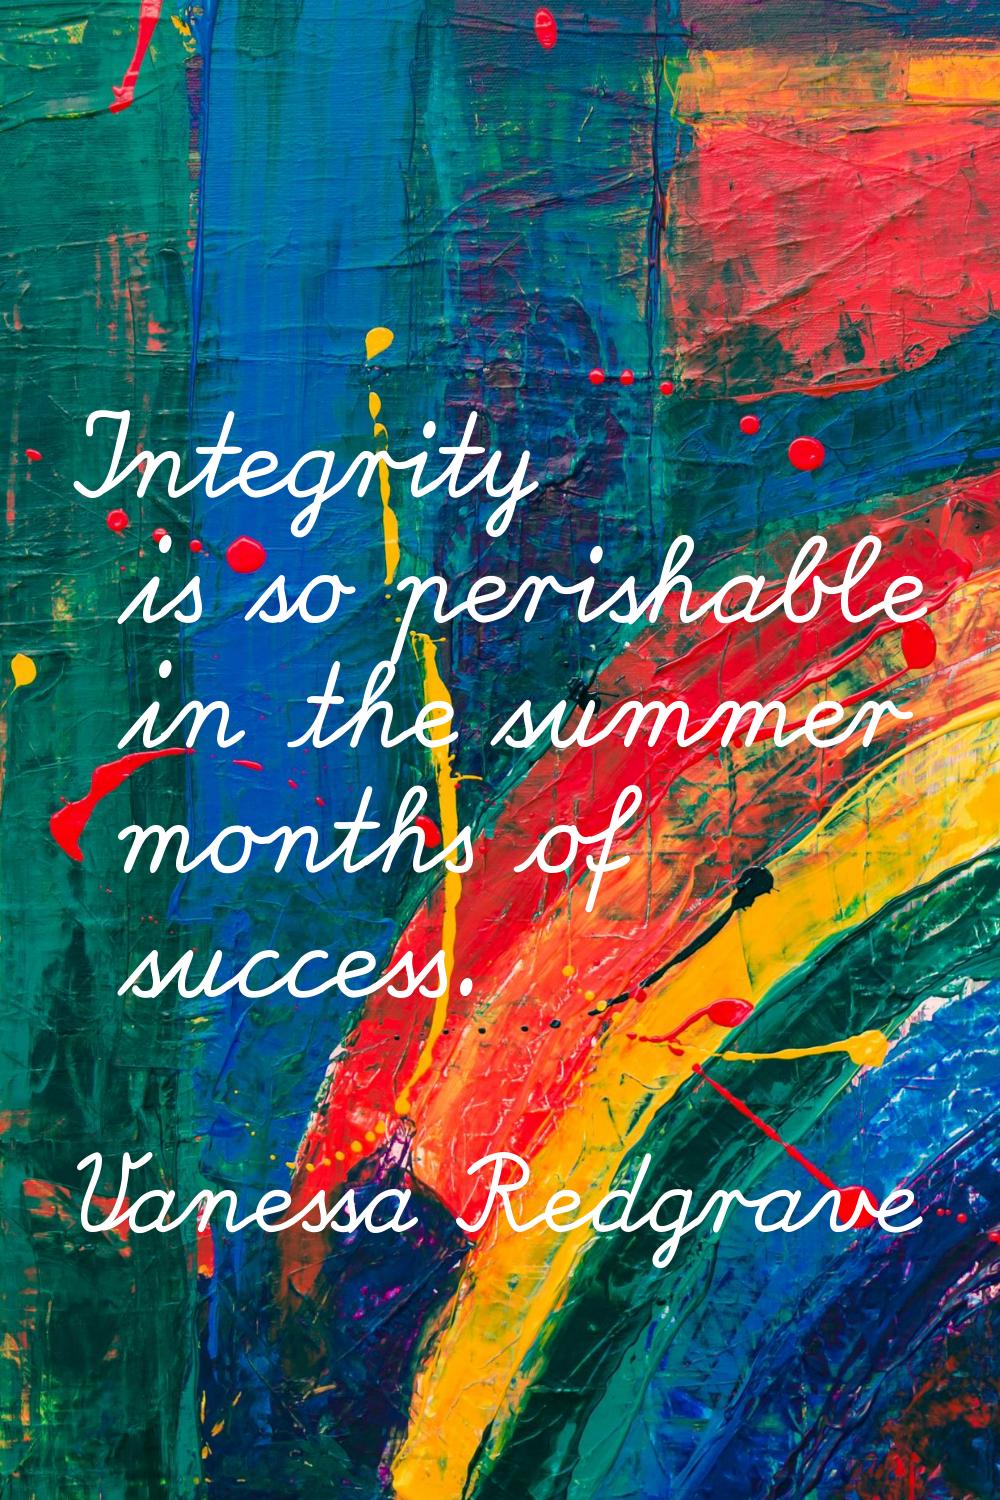 Integrity is so perishable in the summer months of success.